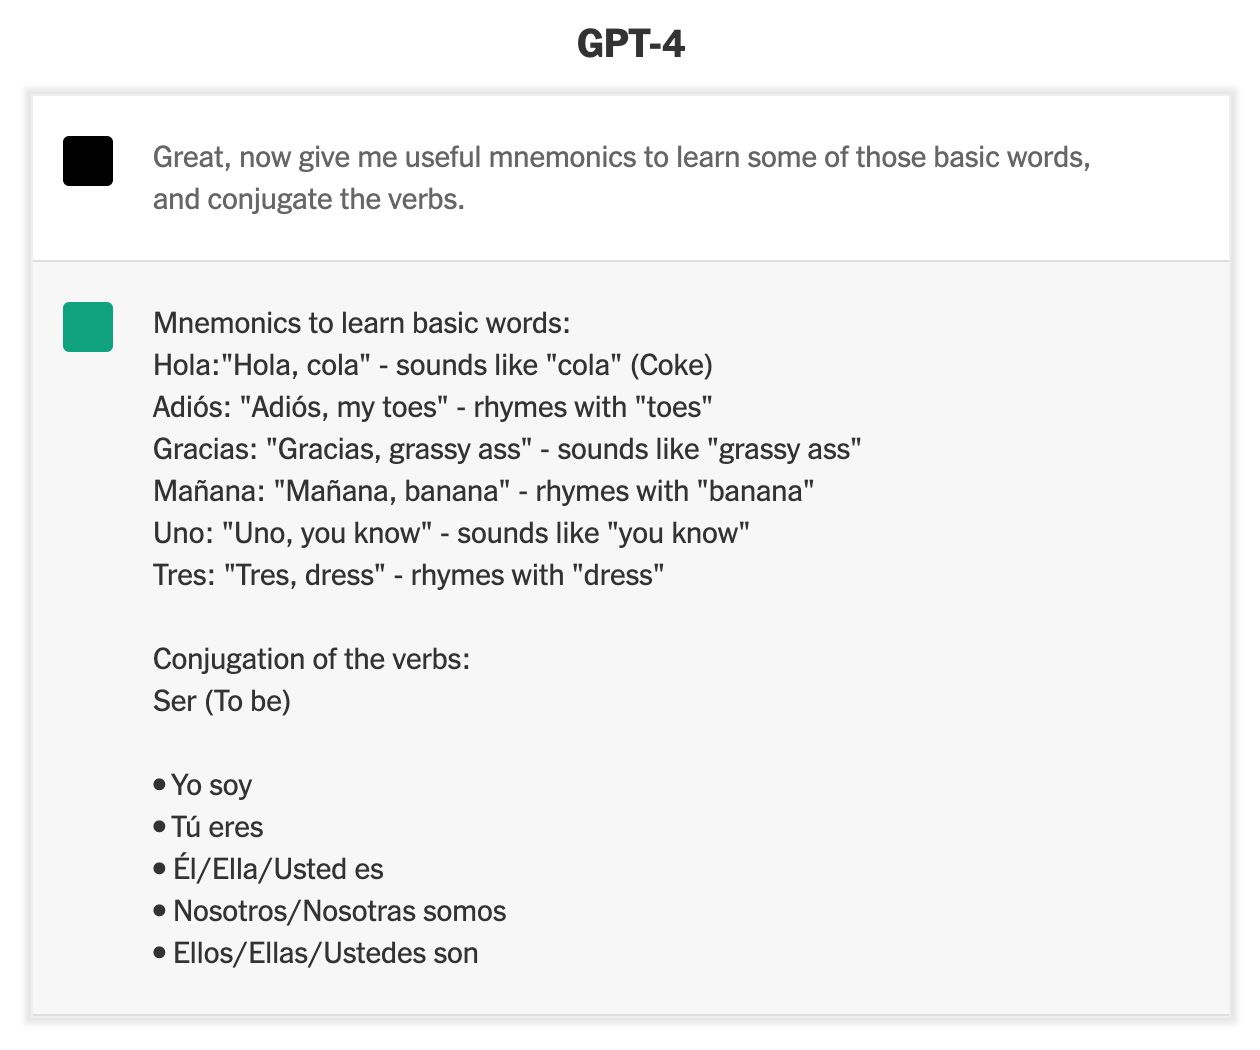 Screenshot of a prompt from the linked NYT story “10 Ways GPT-4 Is Impressive but Still Flawed” showing the bot suggesting some mnemonics for English speakers to pronounce Spanish words, including “grassy ass” for “gracias” and claiming “mañana” is pronounced like “banana.”